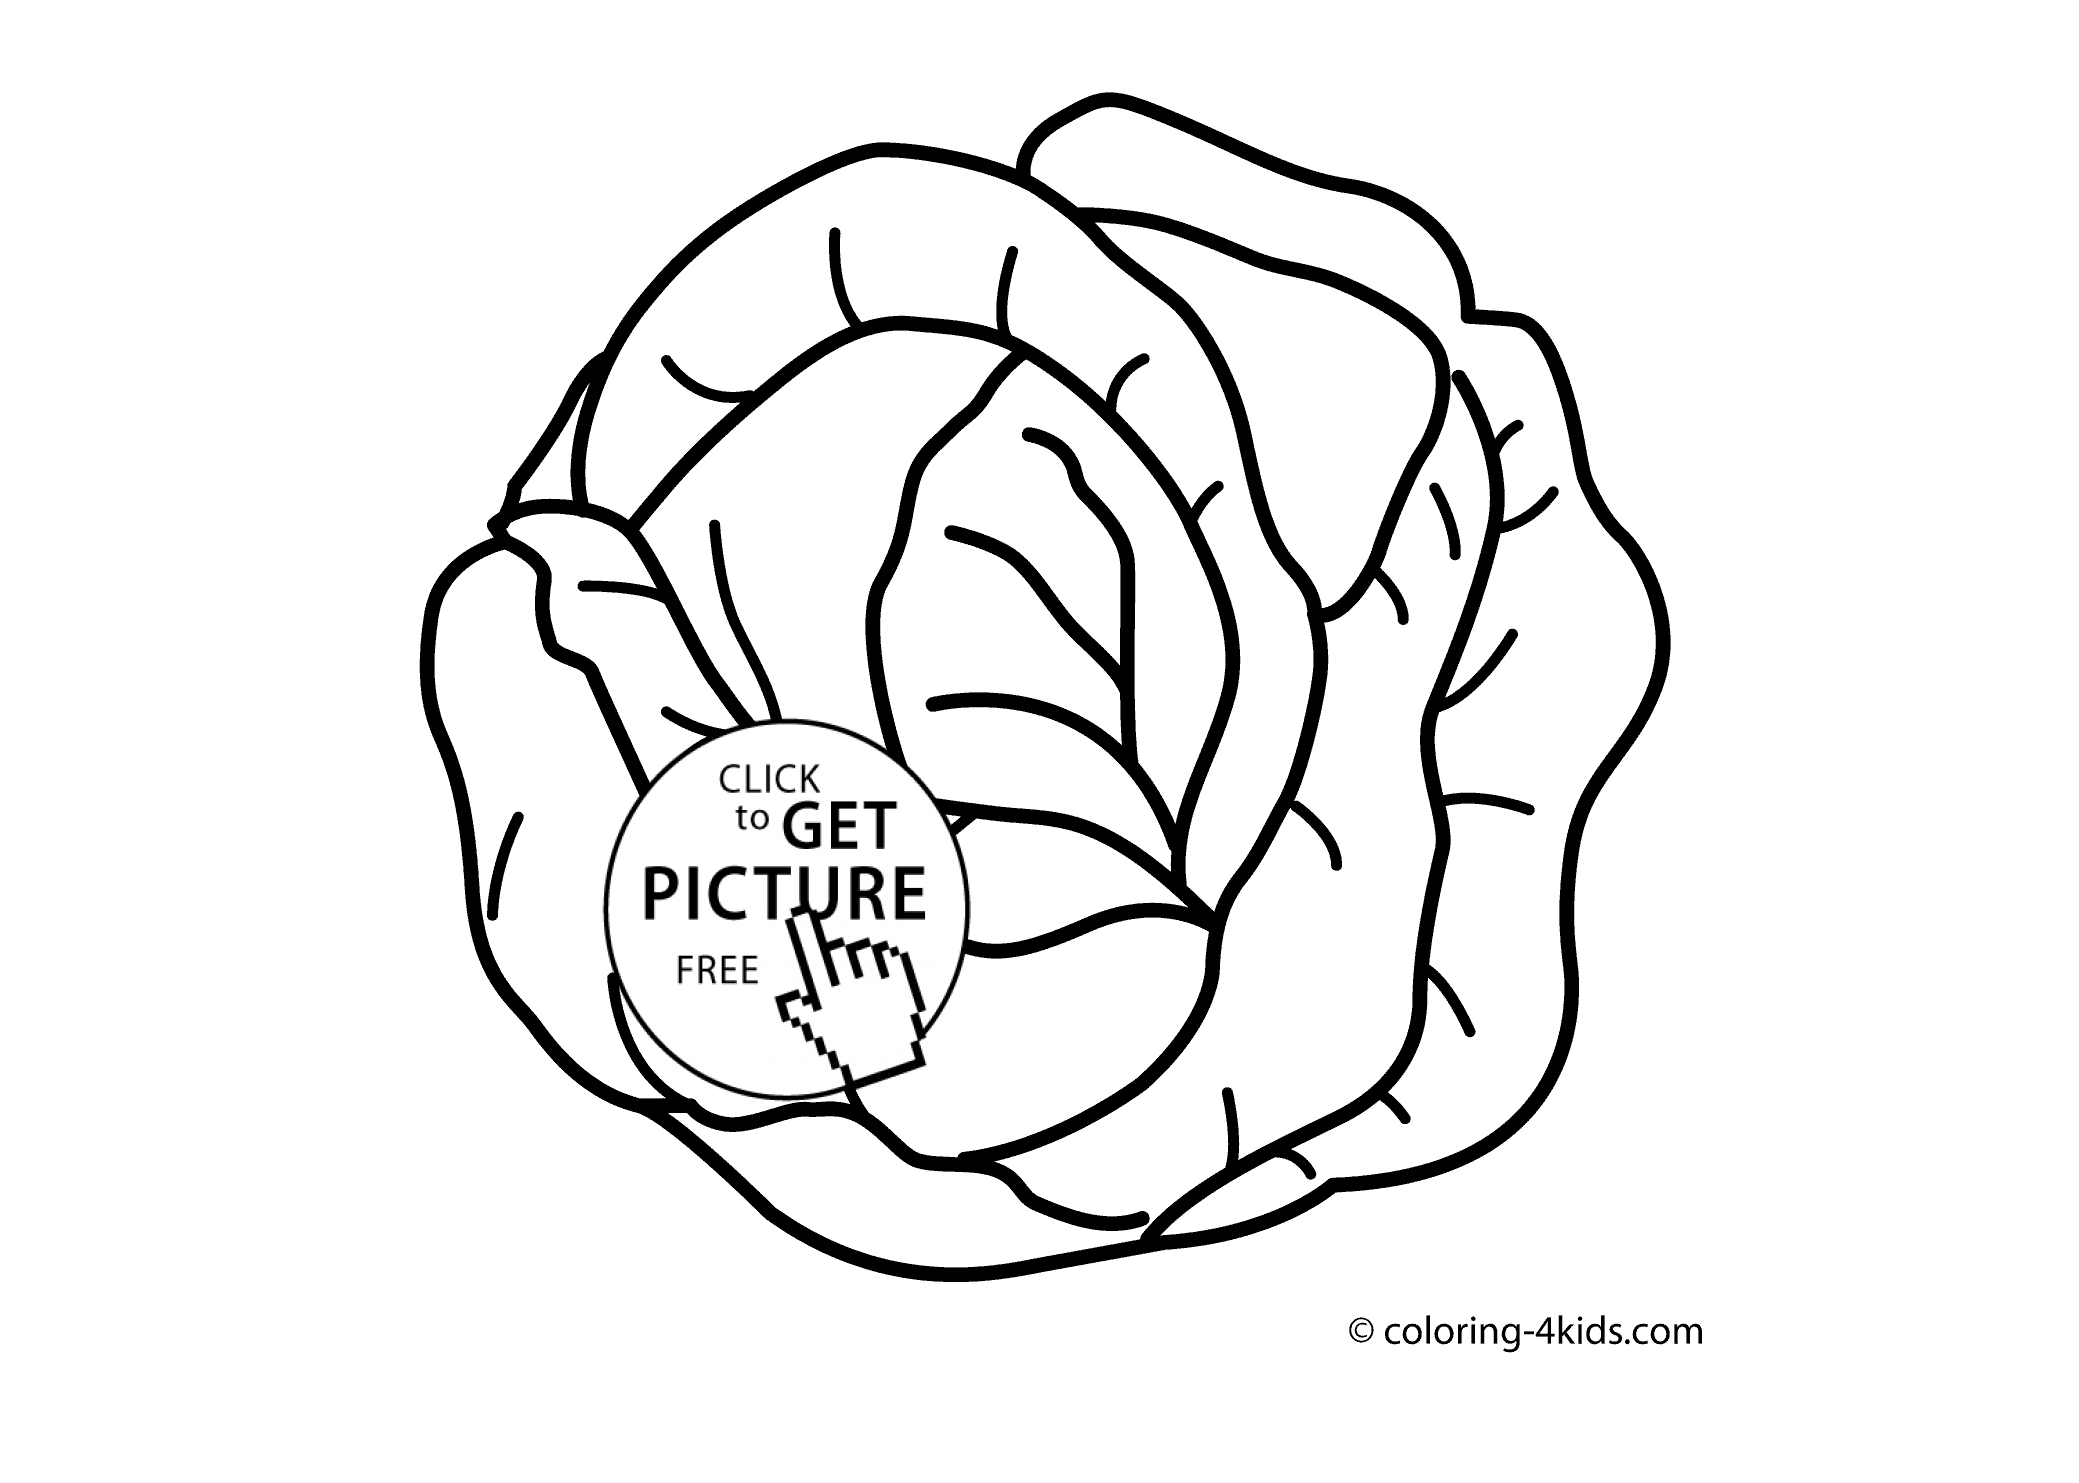 Vegetables Coloring Page Cabbage Vegetable Coloring Page For Kids Printable Coloing 4kids